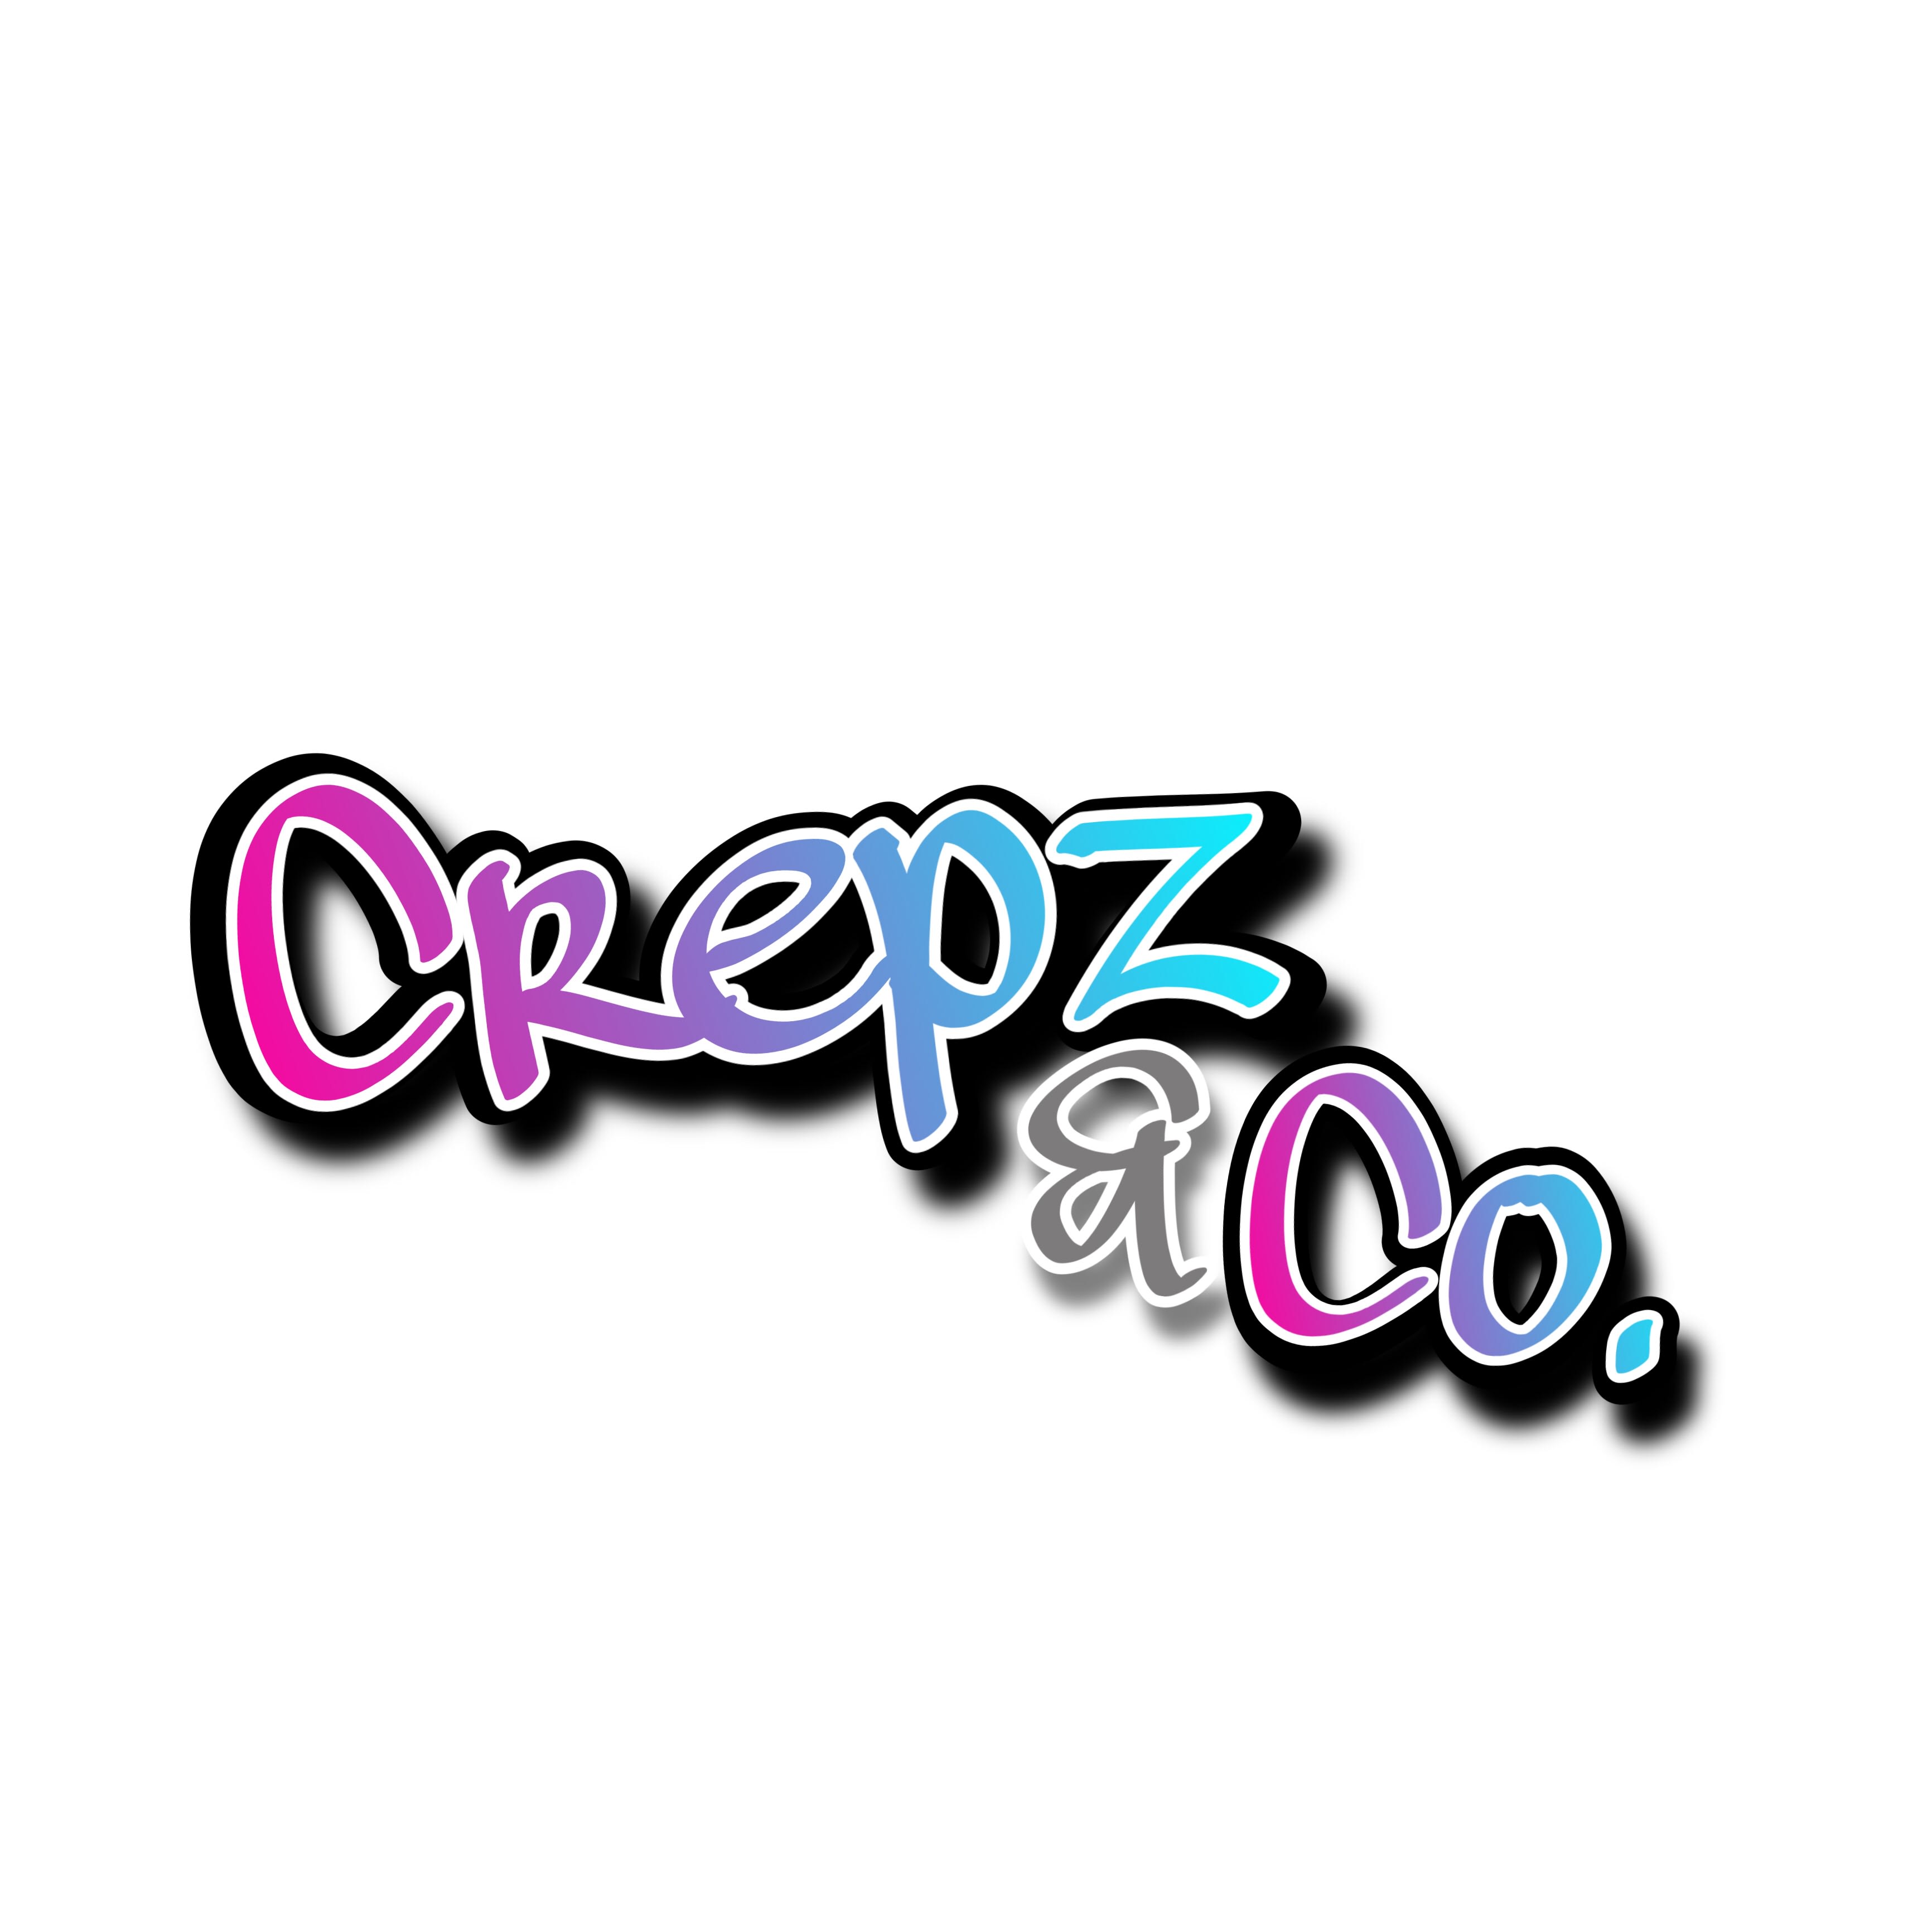 Crepz And Co